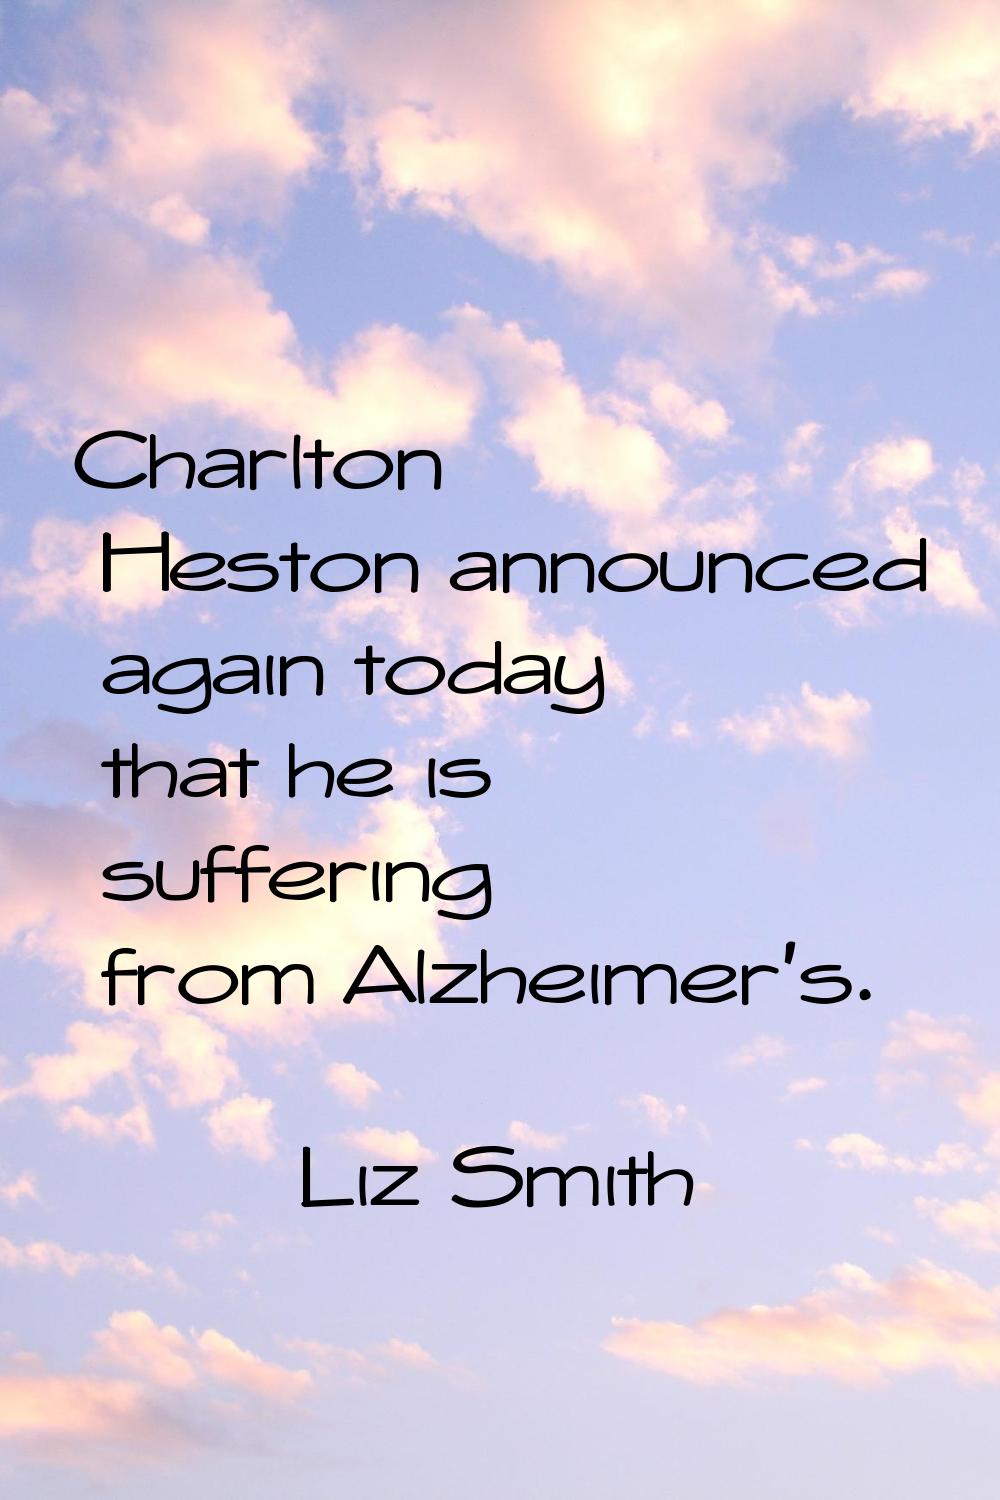 Charlton Heston announced again today that he is suffering from Alzheimer's.